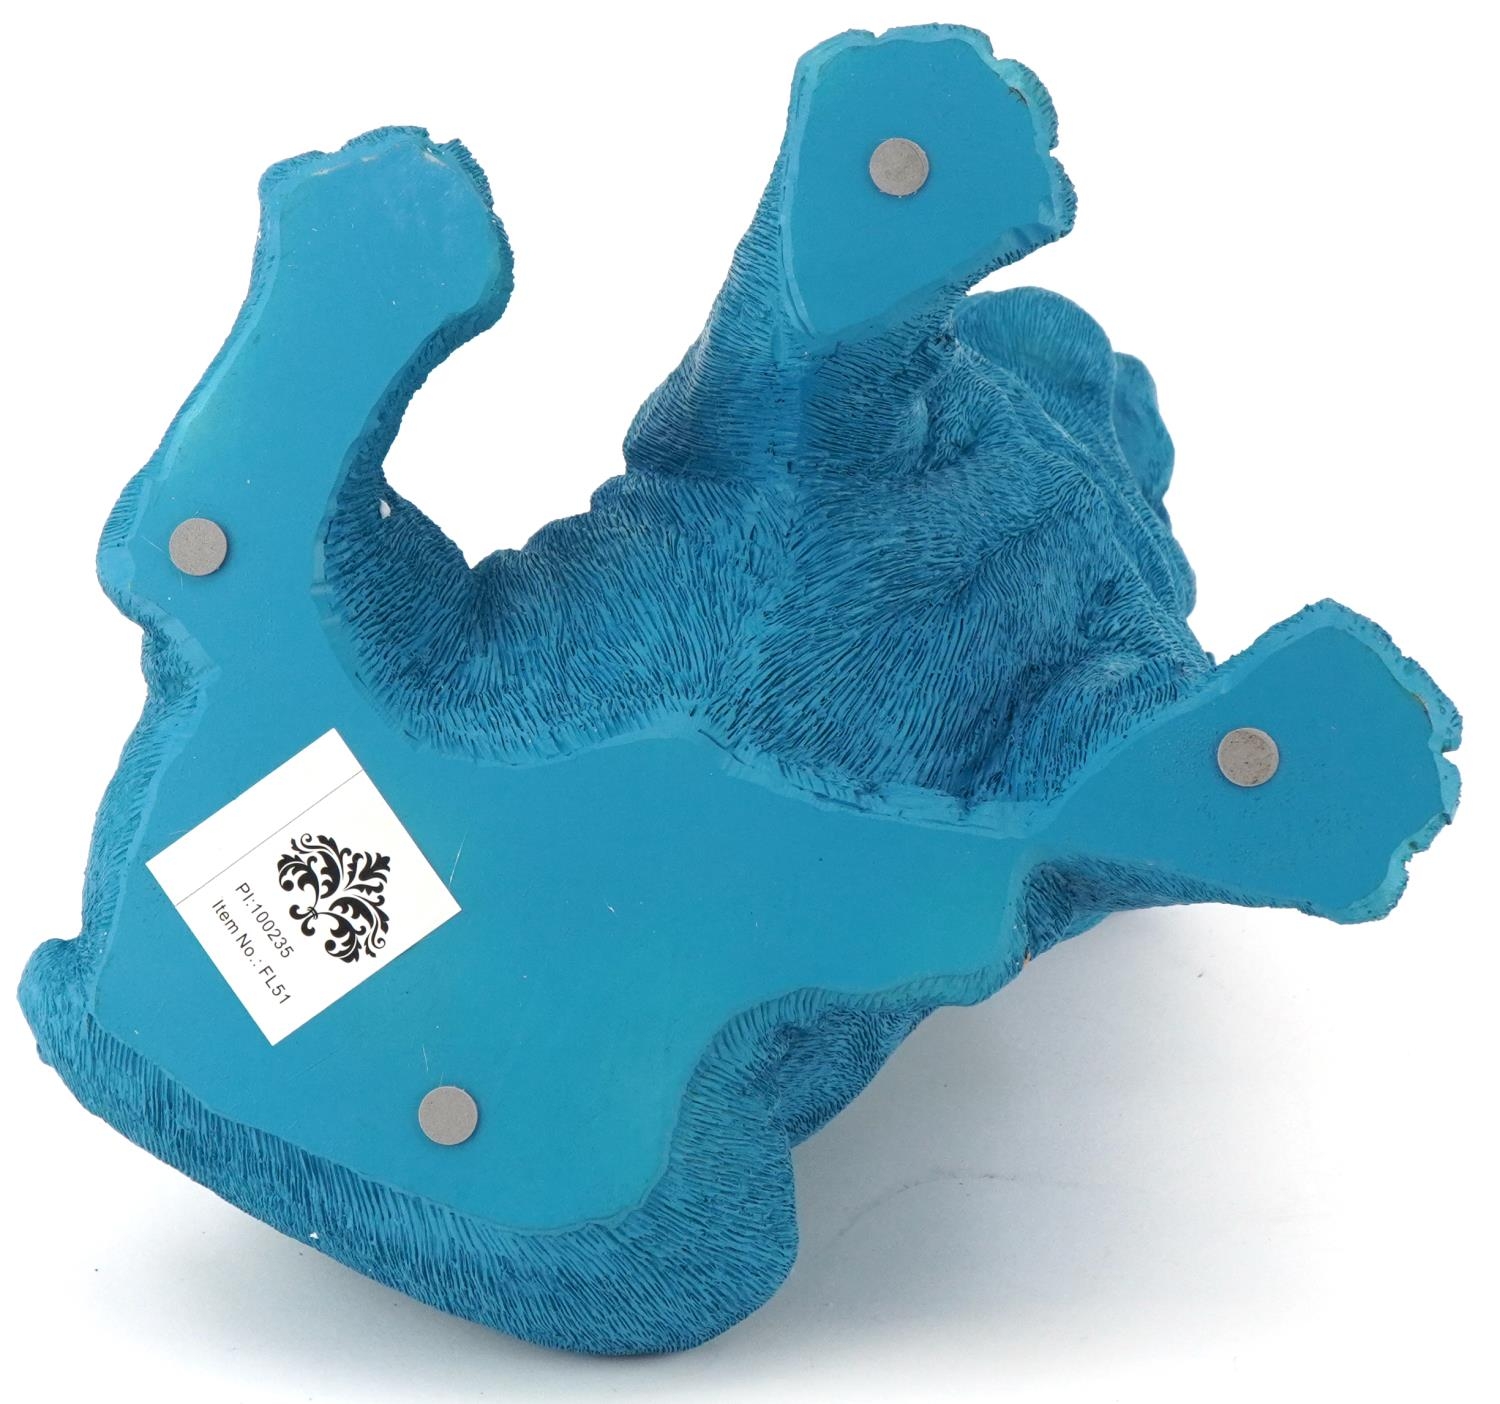 Novelty blue painted model of a comical happy dog, 27cm high - Image 3 of 3